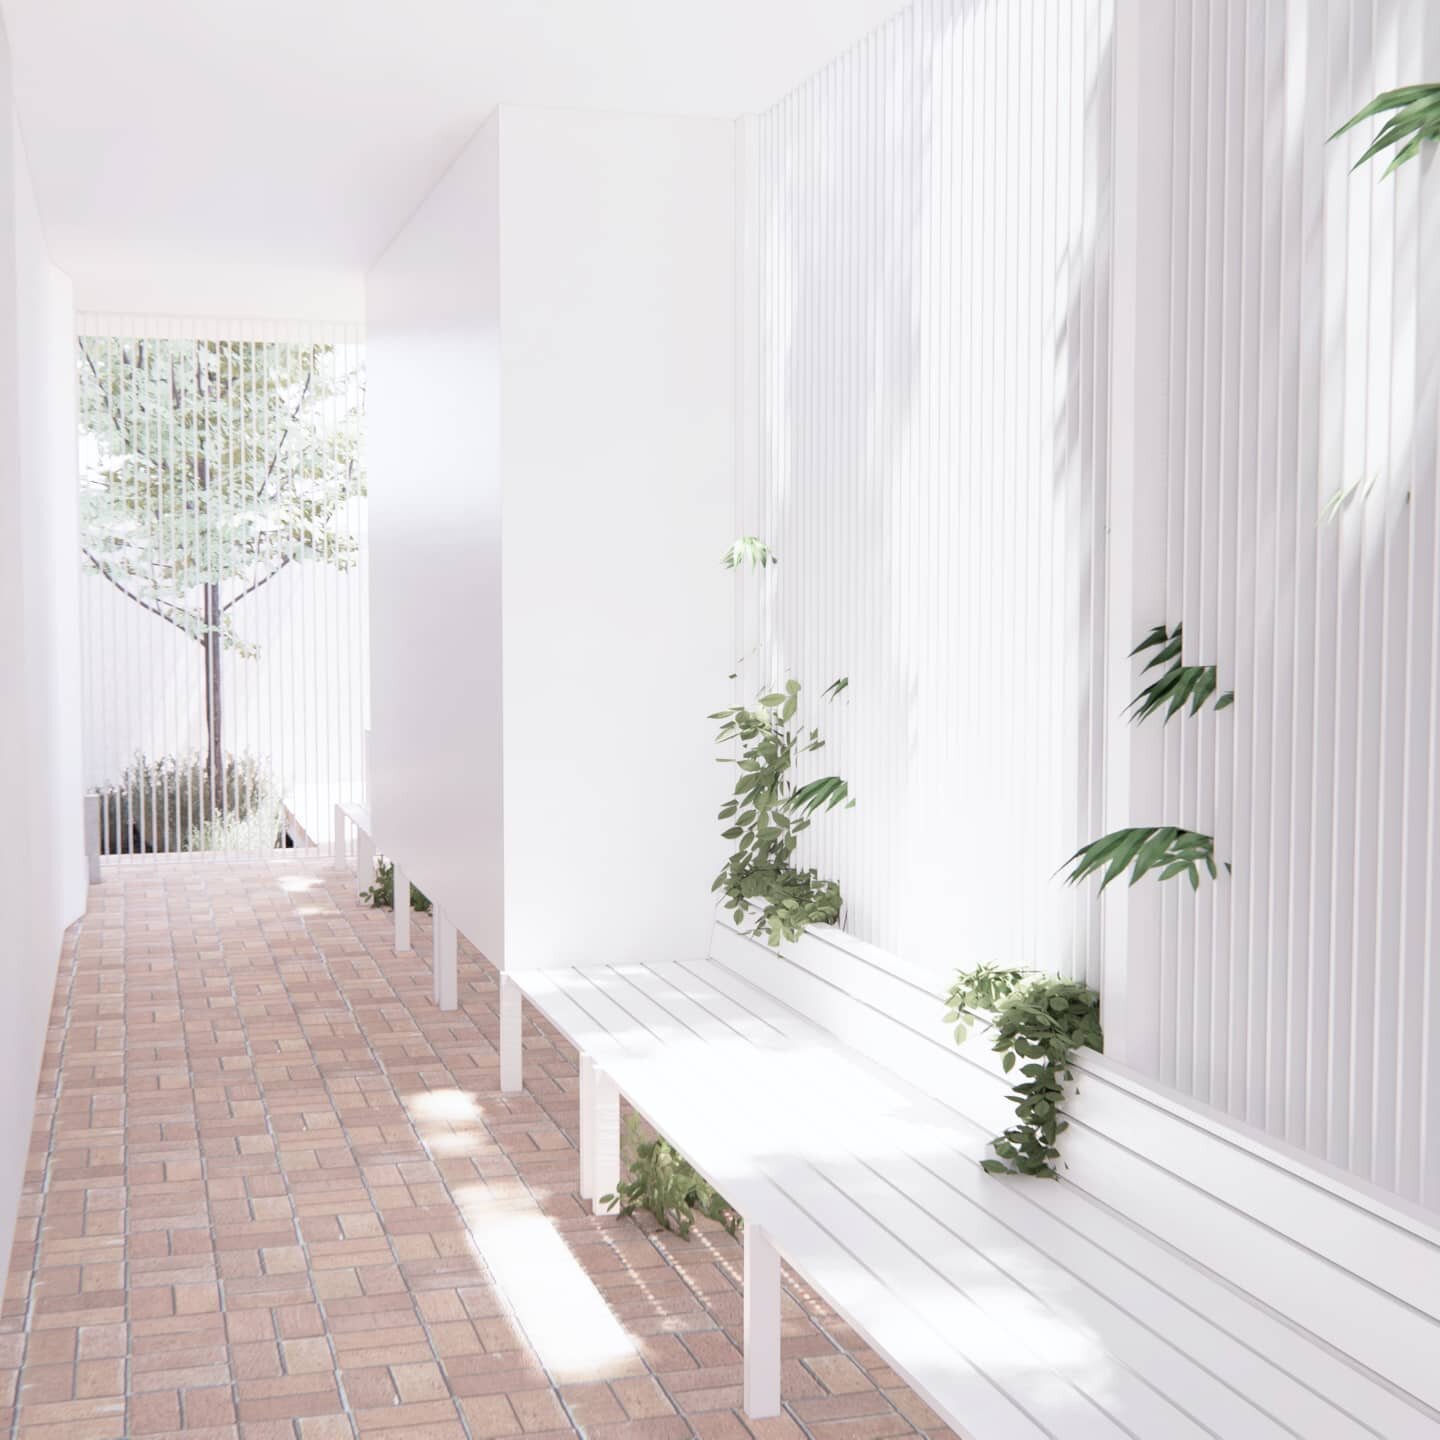 _Petrie Terrace House

Talk about petite! This proposal for a renovation in Petrie Terrace clocks in at 145m&sup2; internal area.

Site size, heritage constraints and overland water flow all started as constraints and ended up contributing so much in